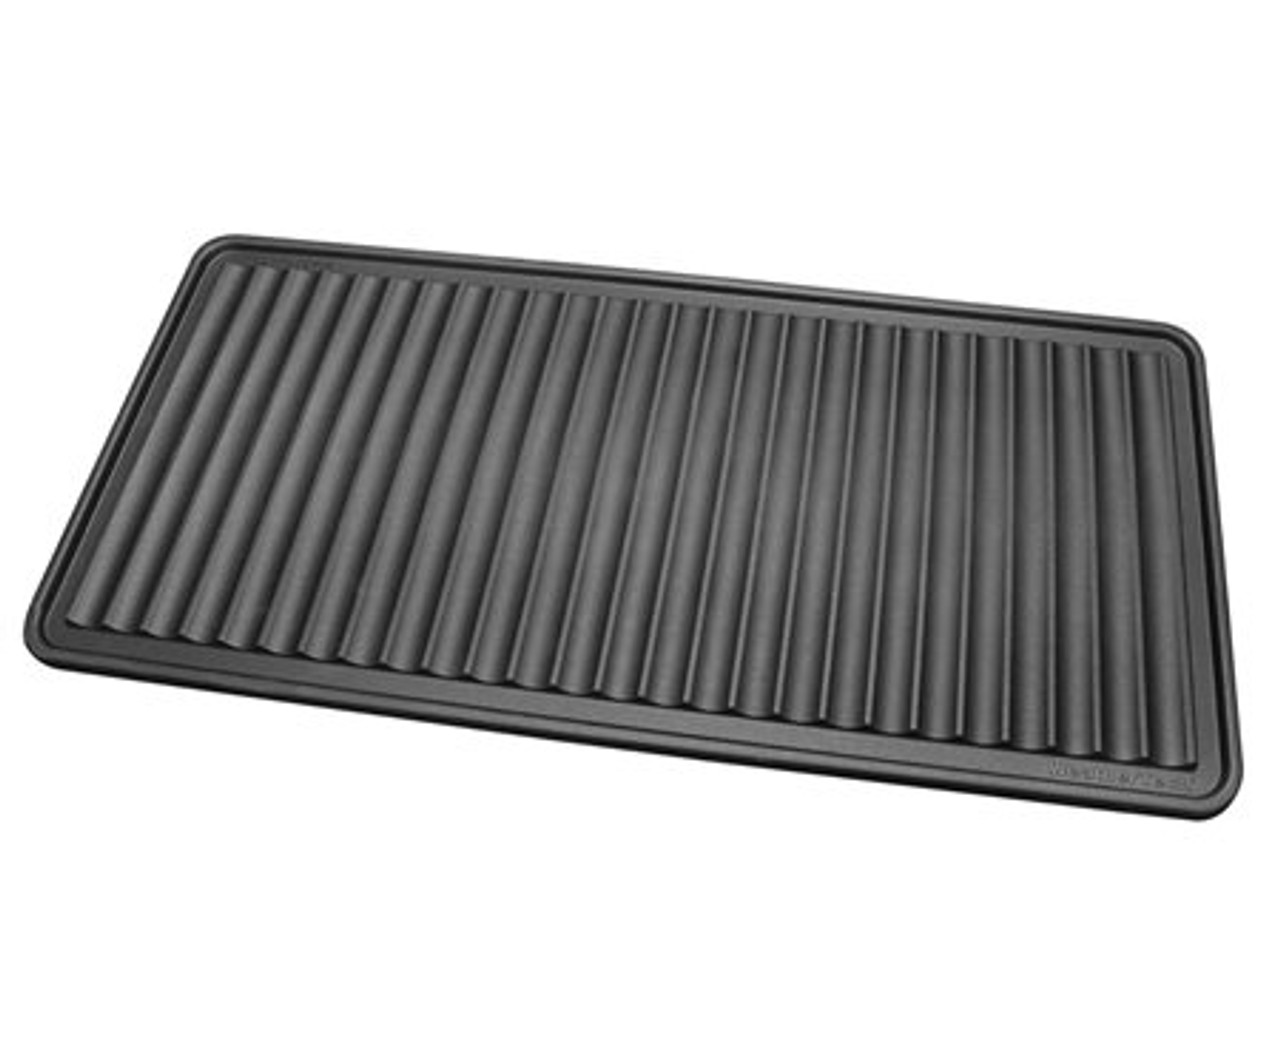 WeatherTech Black Boot Tray 16in x 36in - WEAIDMBT1B